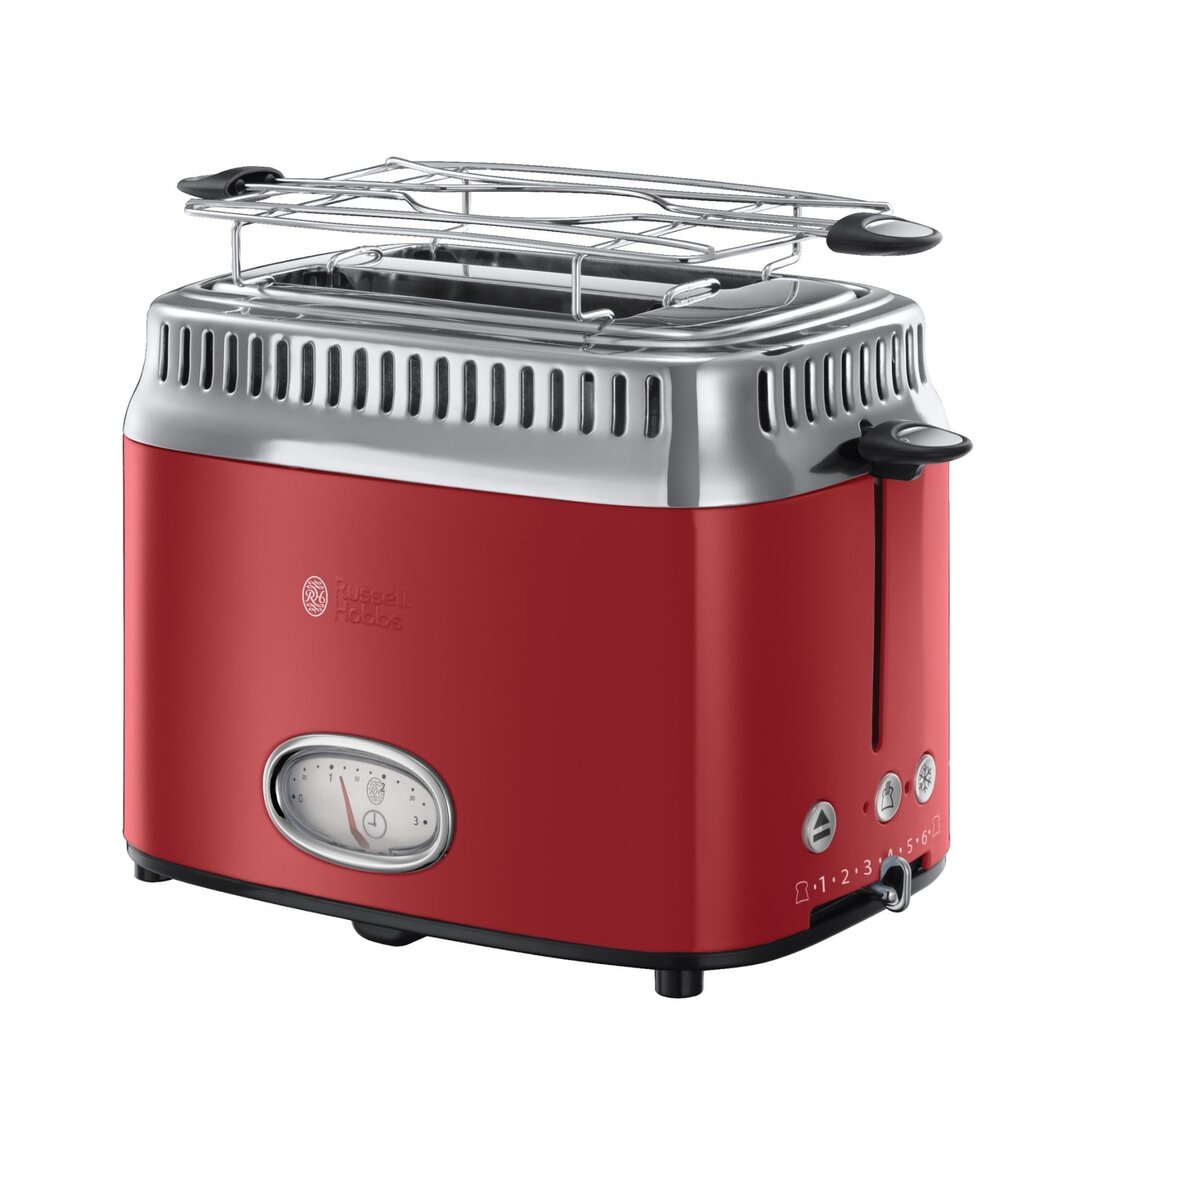 RUSSELL HOBBS Toaster 21680-56 Retro, Rouge